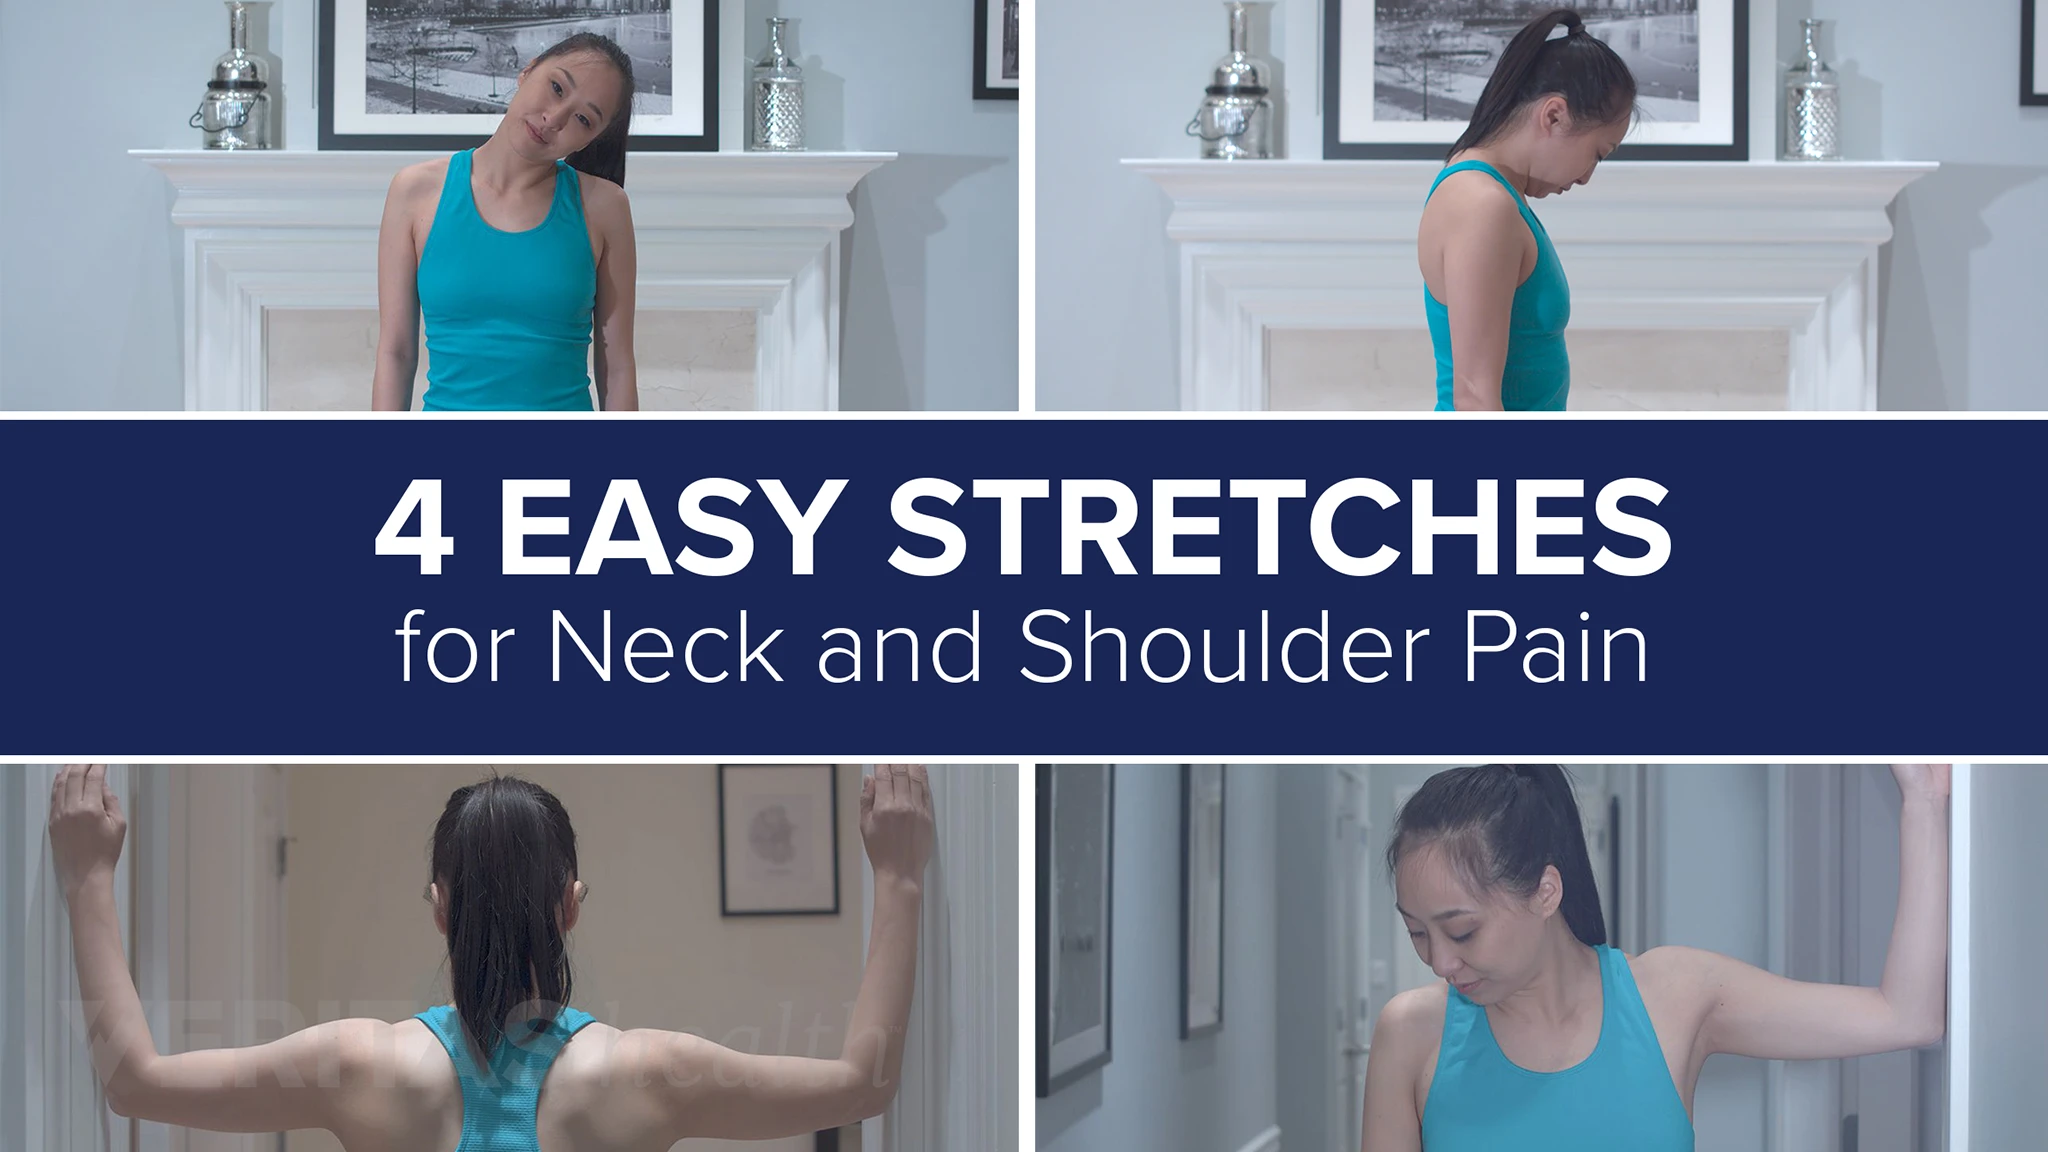 Shoulder Pain: It may be an easy fix